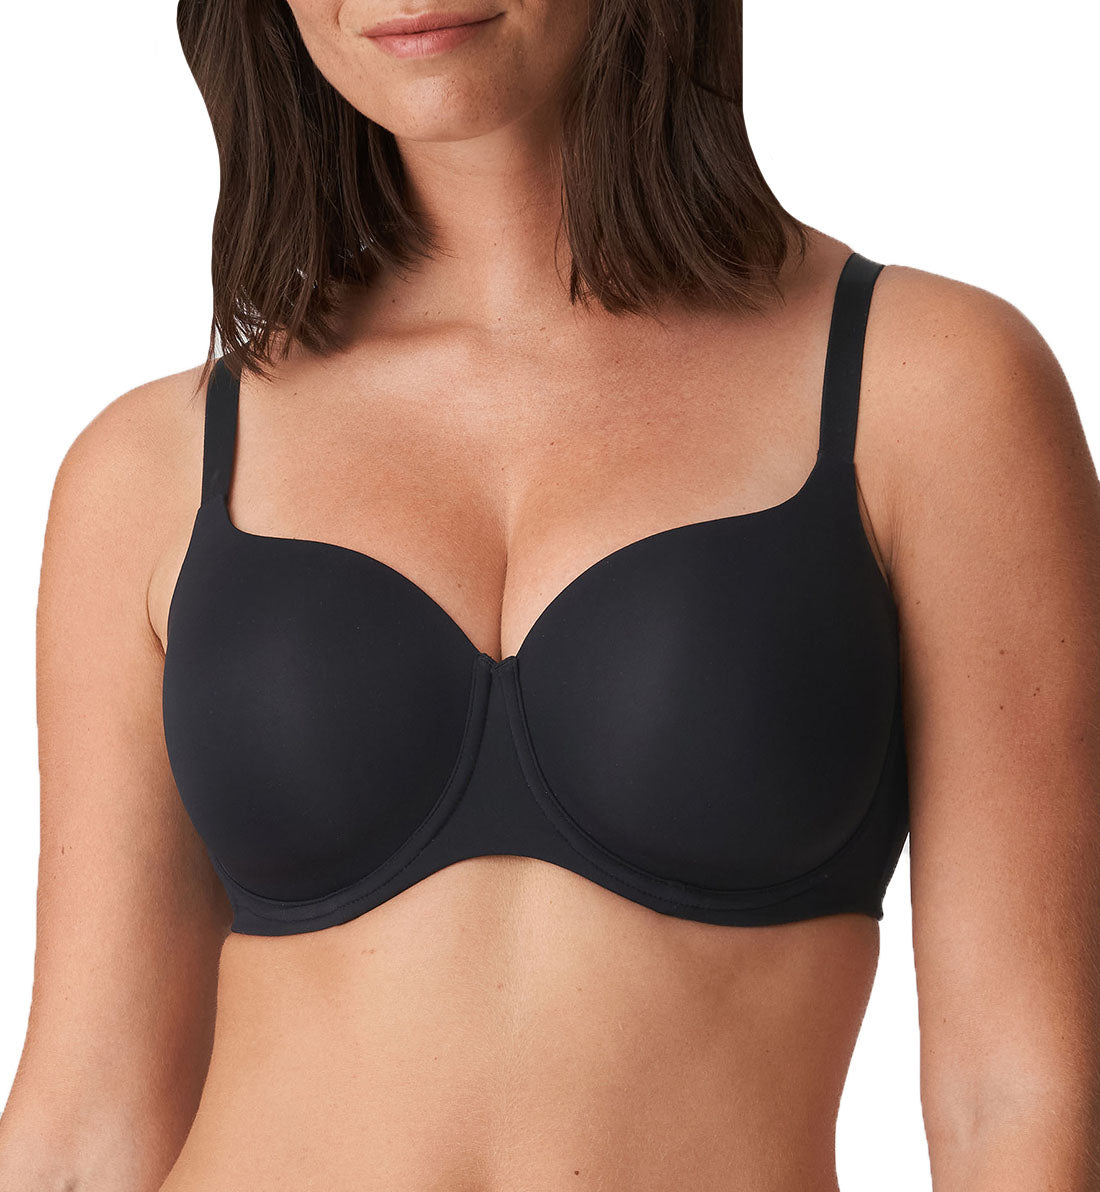 Esty Lingerie - Did you know that the D cup on a 32D and a 38D